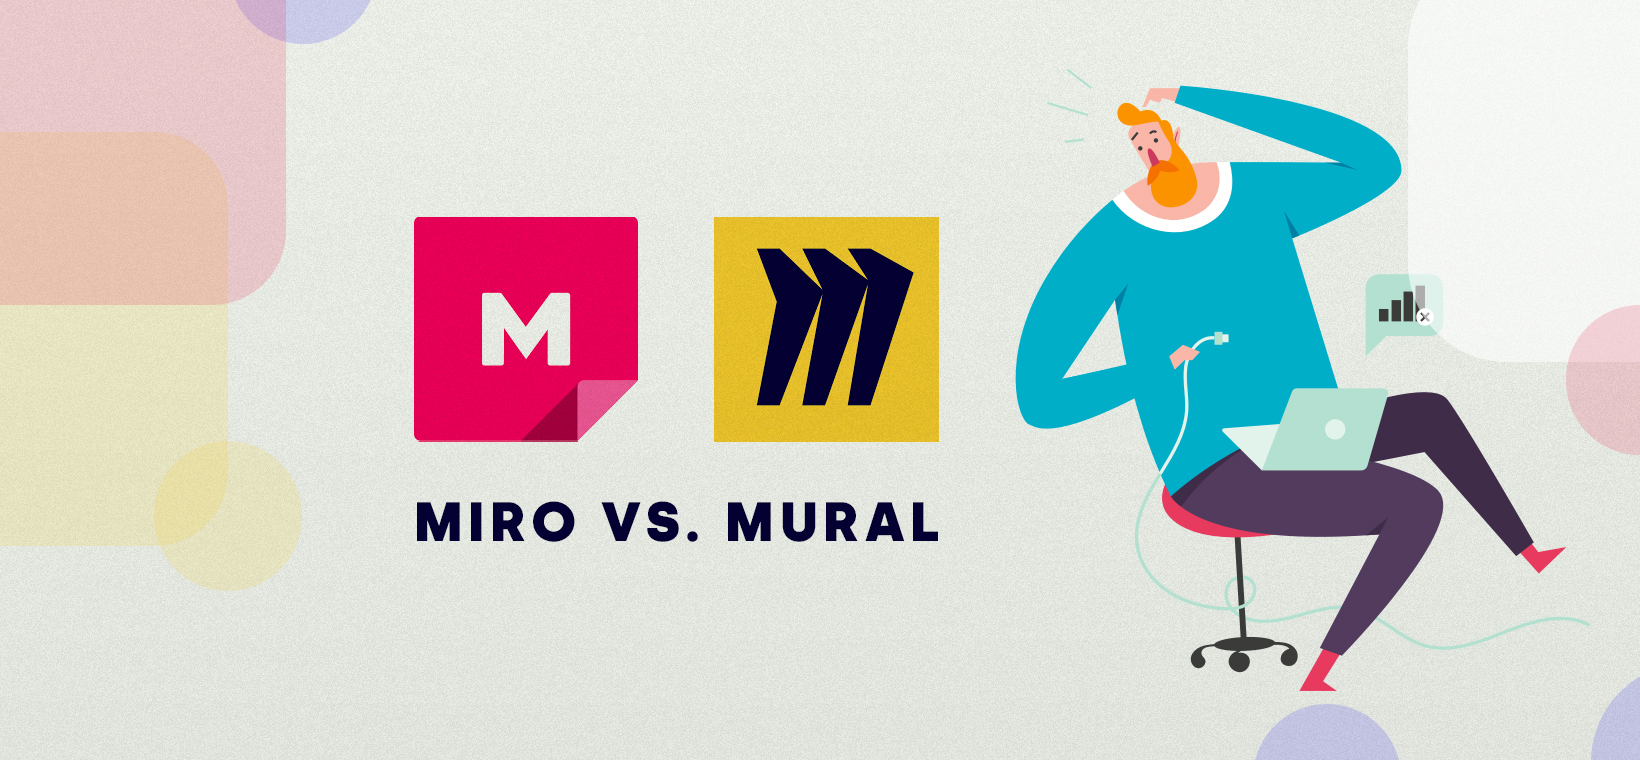 Miro vs. Mural: Which Remote Digital Whiteboard Is Better?